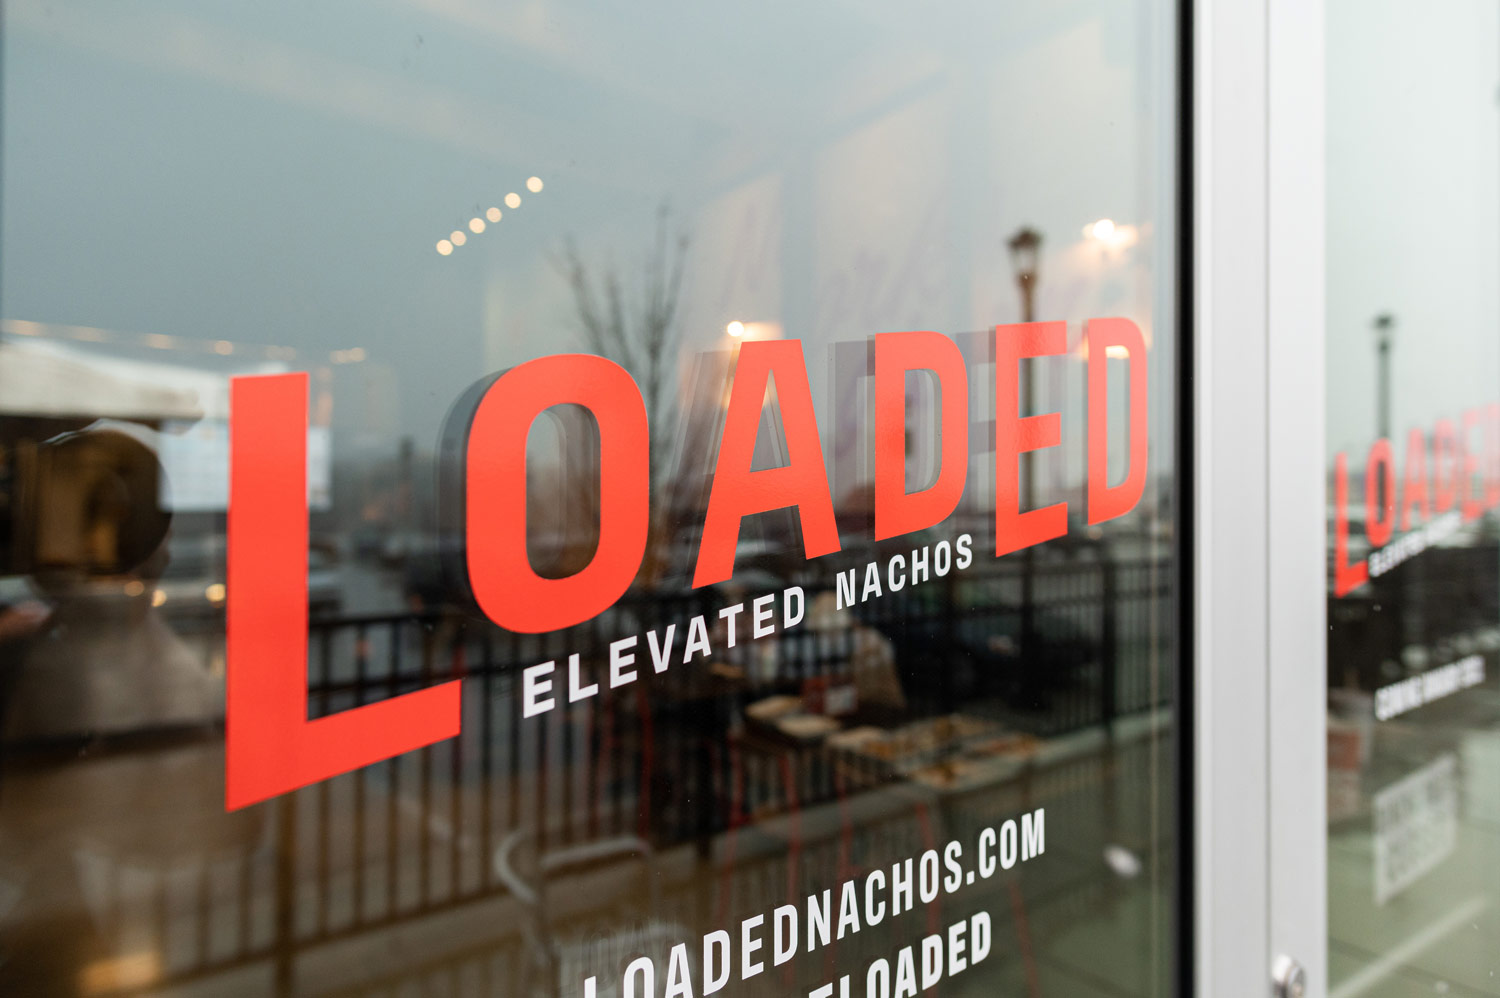 Fast-casual branding on Loaded front door signage